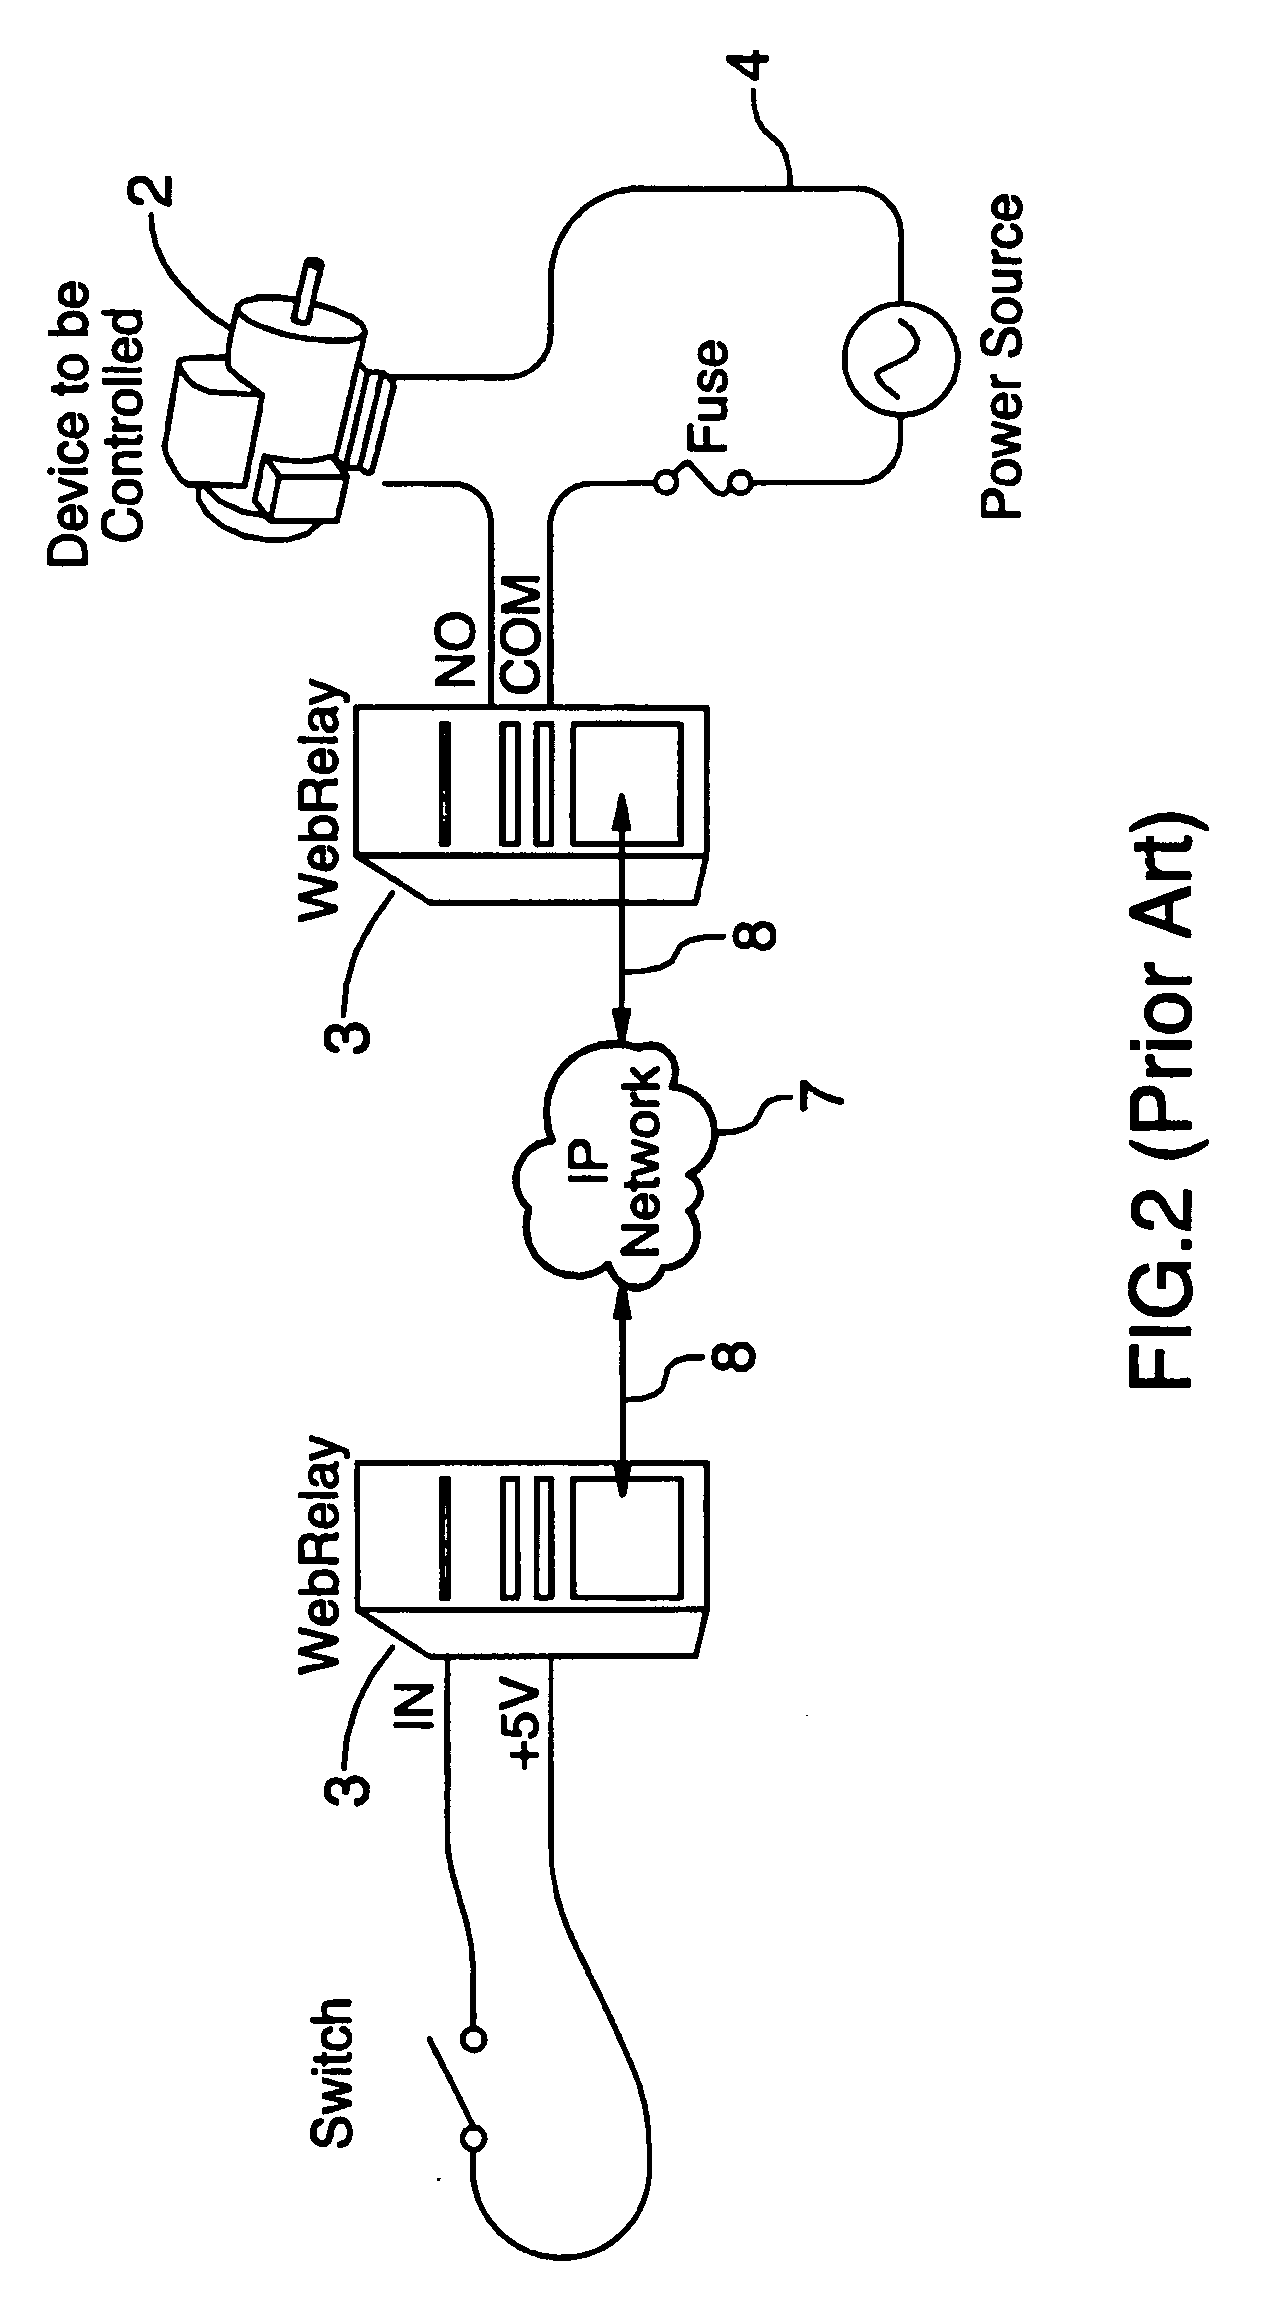 System and method for remotely monitoring and controlling pump jacks